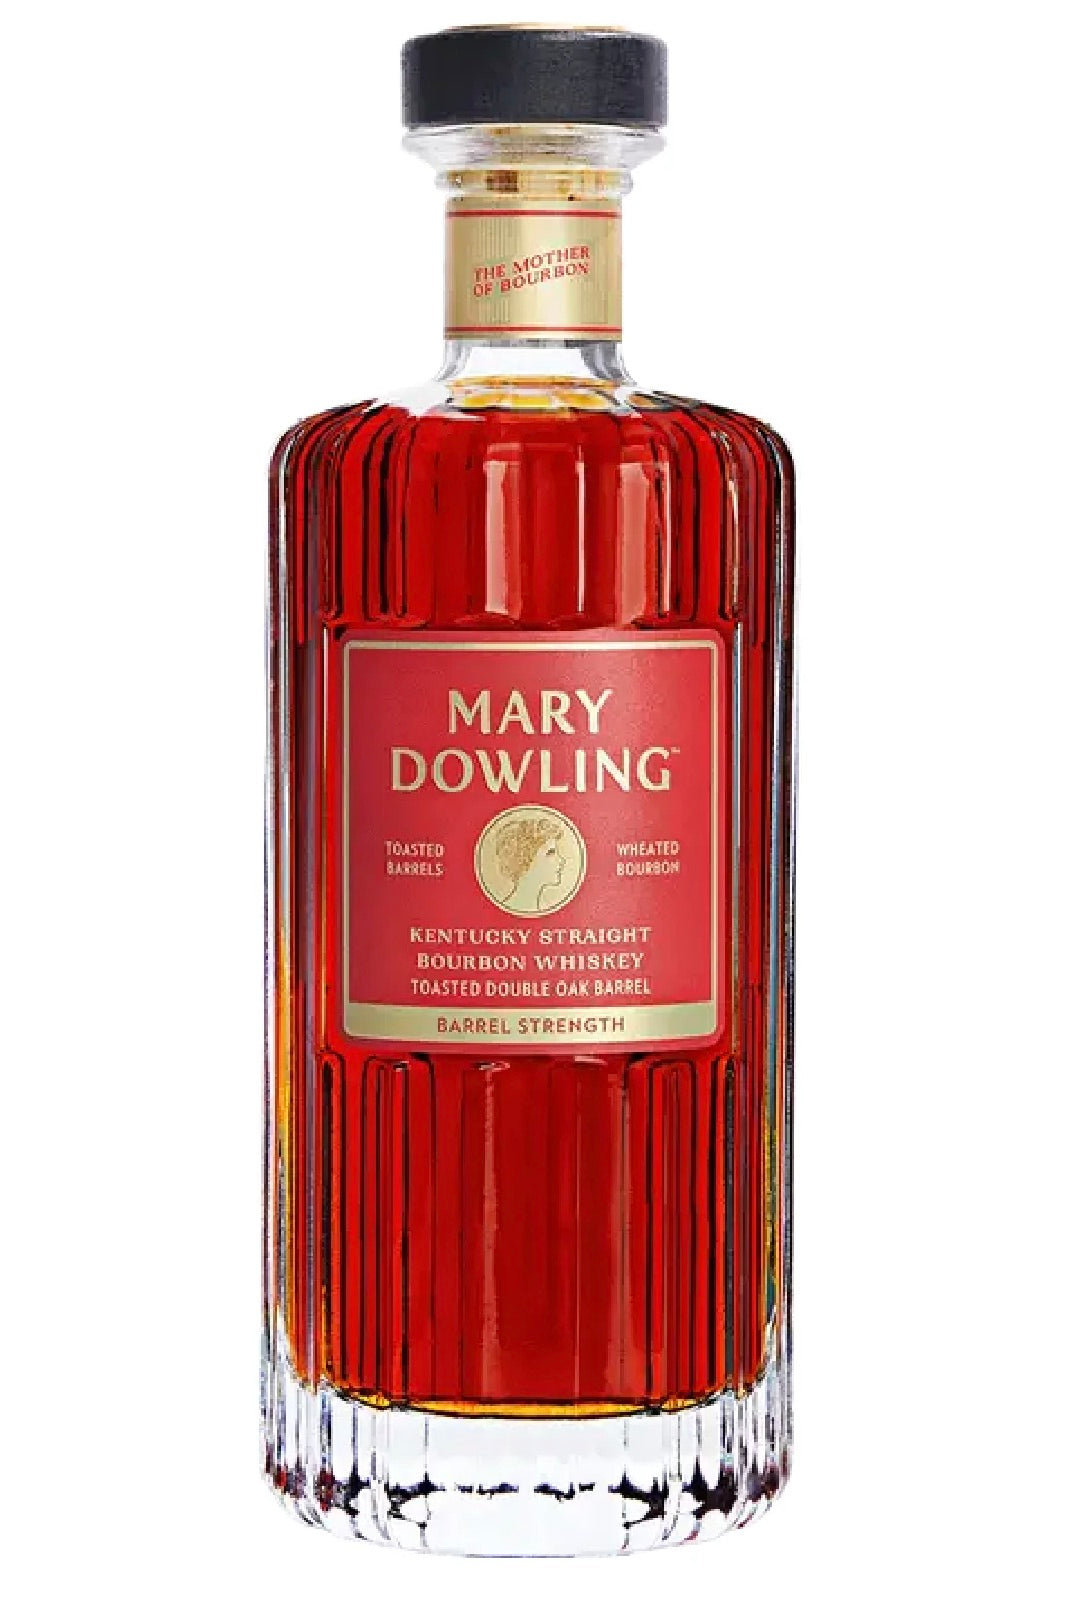 Mary Dowling Toasted Double Oak Barrel Strength Straight Bourbon Whiskey